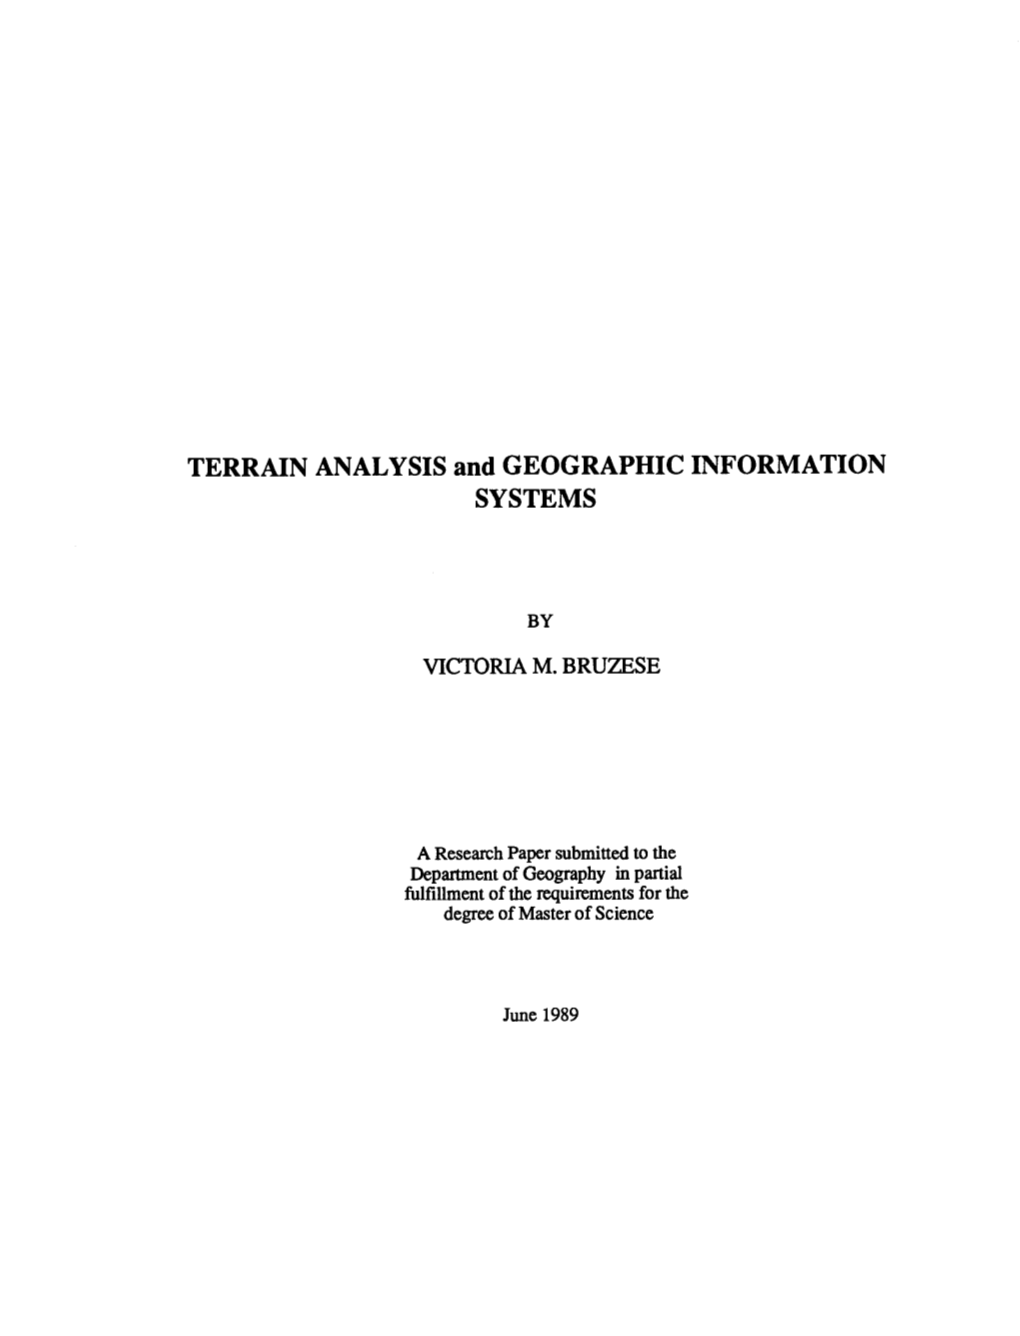 TERRAIN ANALYSIS and GEOGRAPHIC INFORMATION SYSTEMS